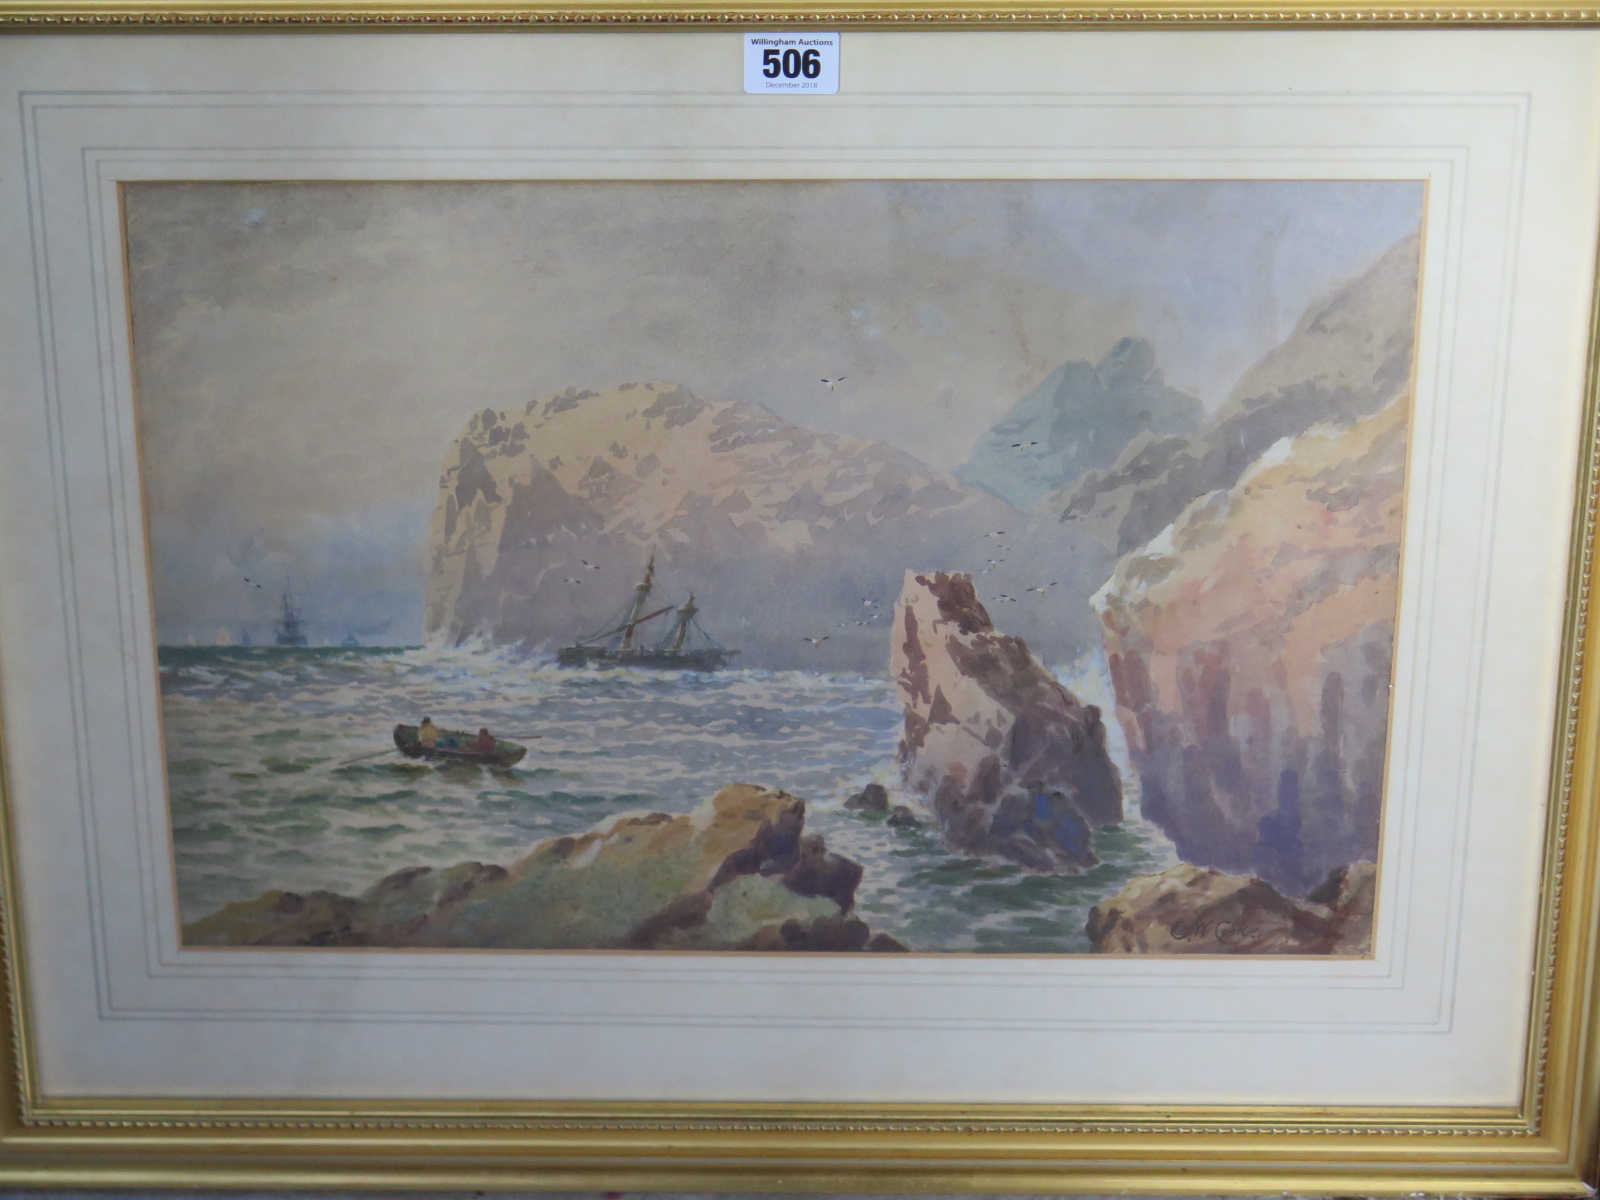 E W Cooke 1811-1880, coastal scene with wreck, watercolour signed lower right with label, verso